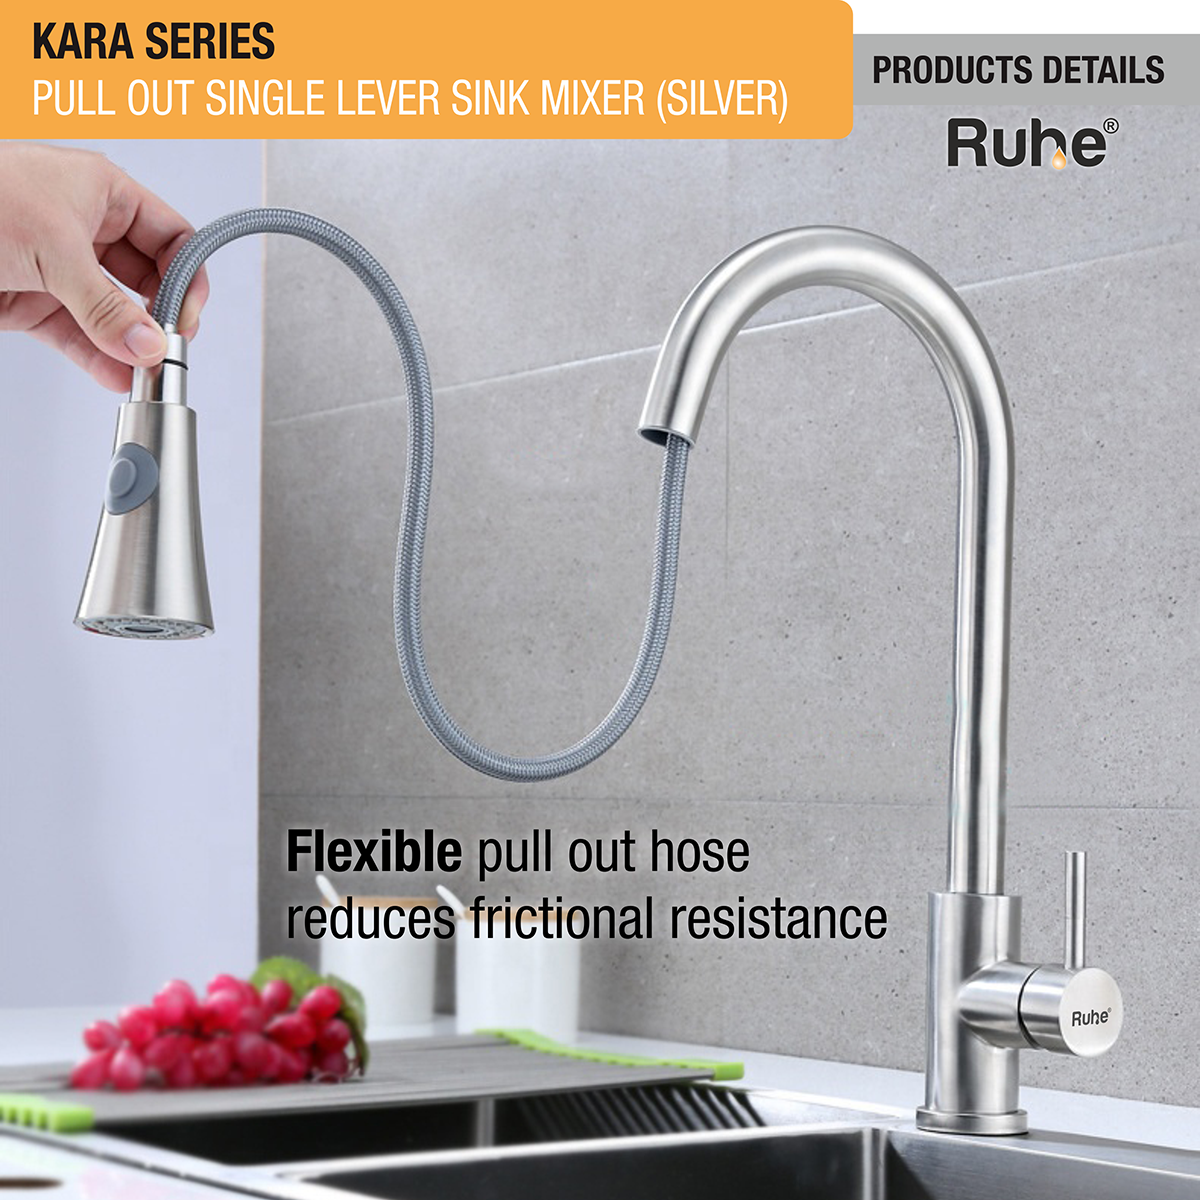 Kara Pull-out Single Lever Table Mount Sink Mixer Faucet with Dual Flow (Silver) 304-Grade SS with flexible pull out hose reduces frictional resistance